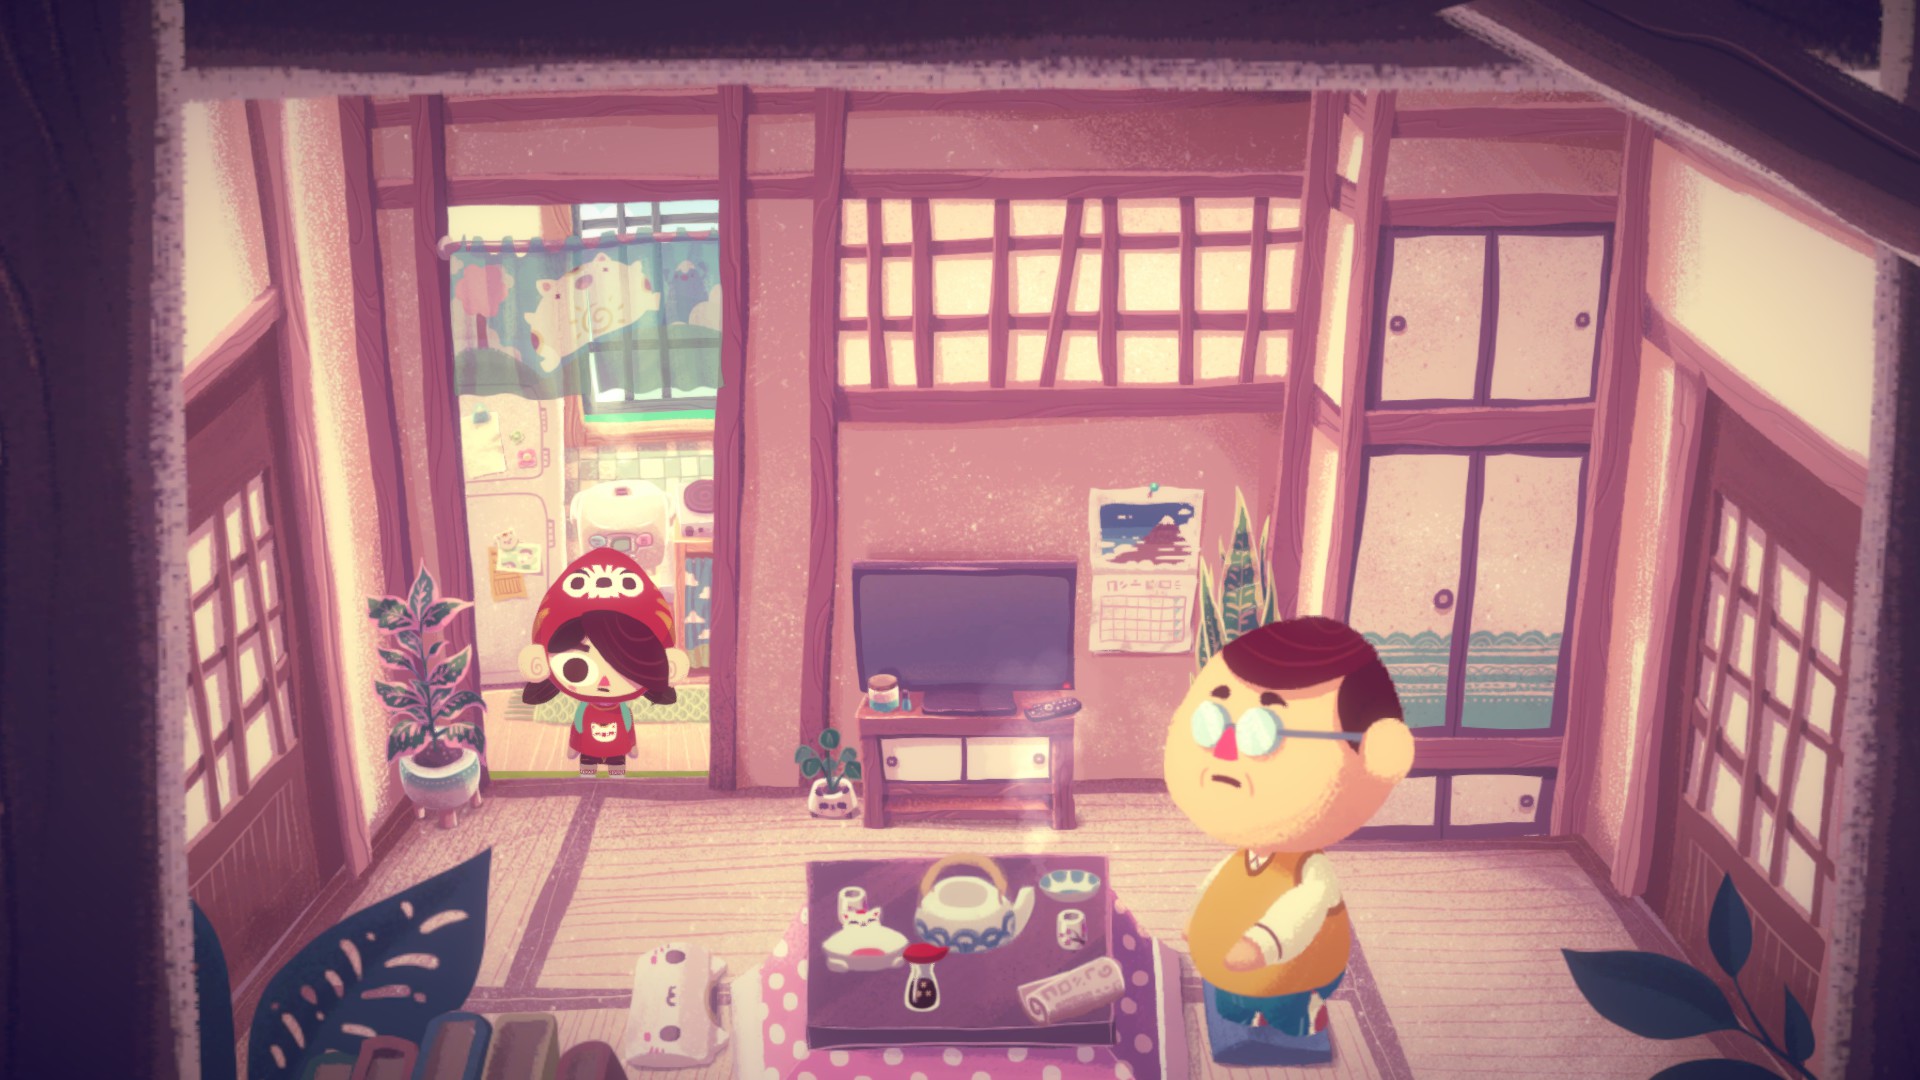 Mineko enters a ship owned by a bespectacled man in Mineko’s Night Market